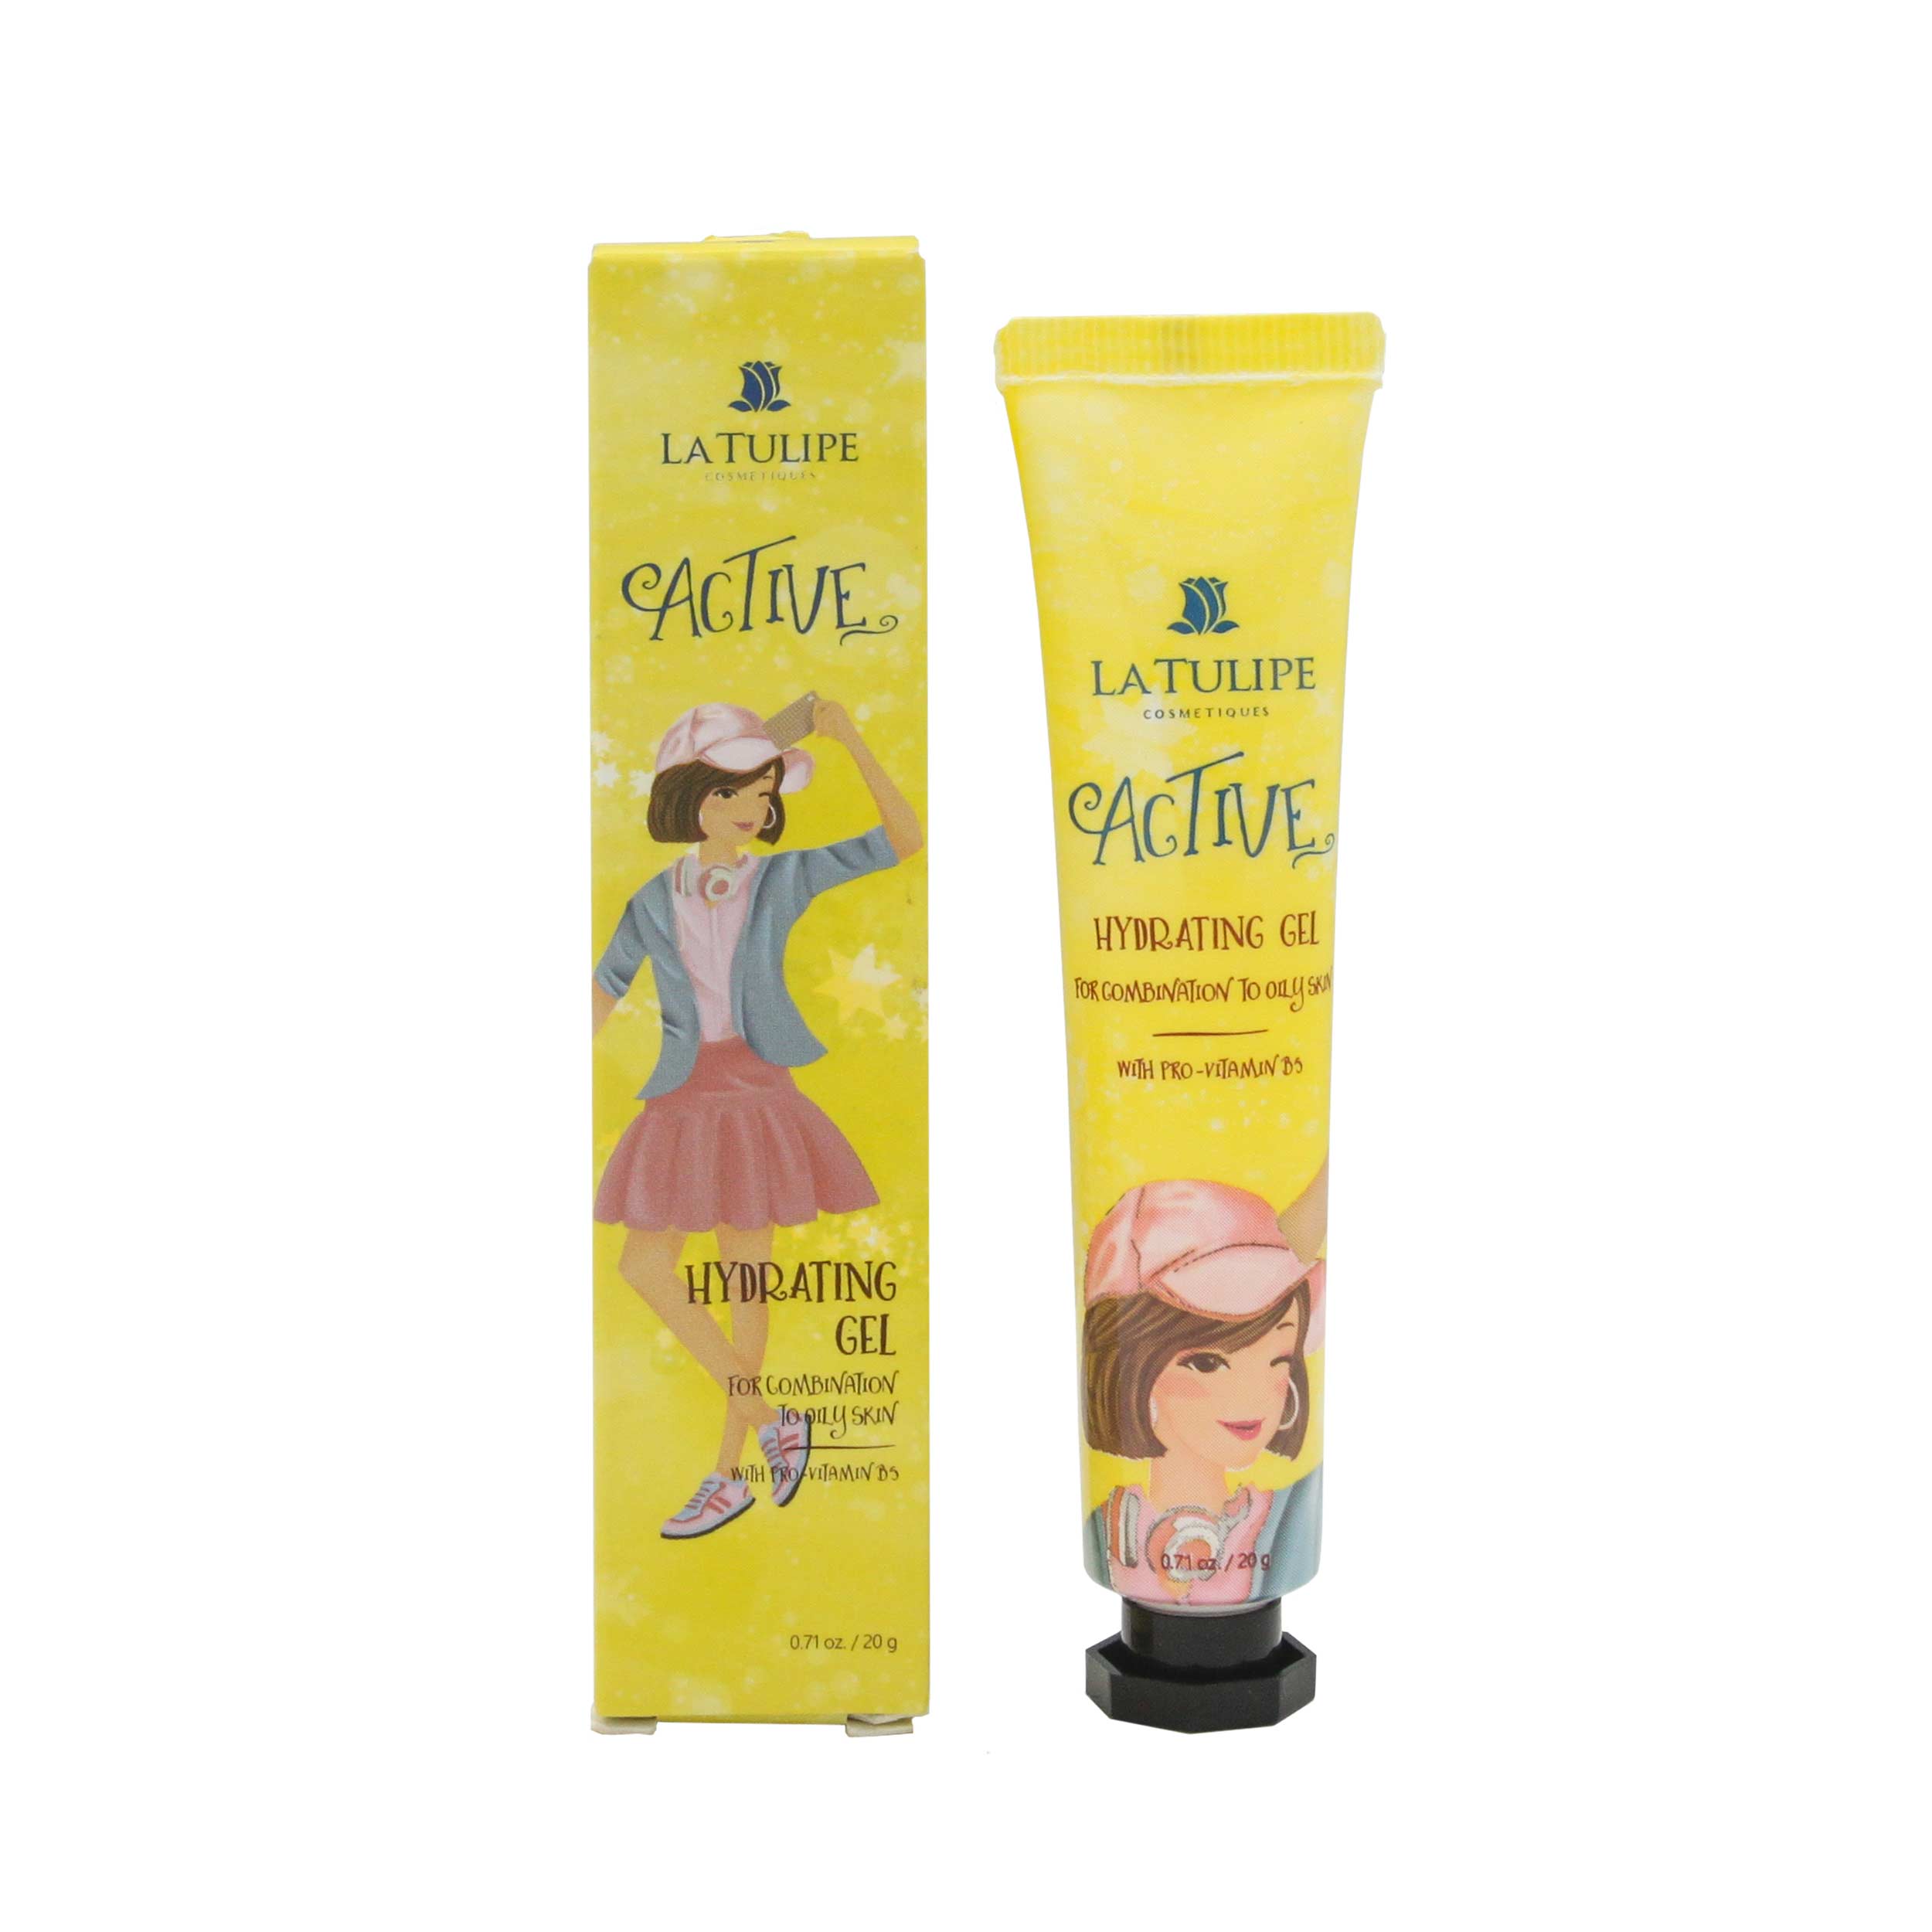 La Tulipe Active Hydrating Gel for Combination to Oily